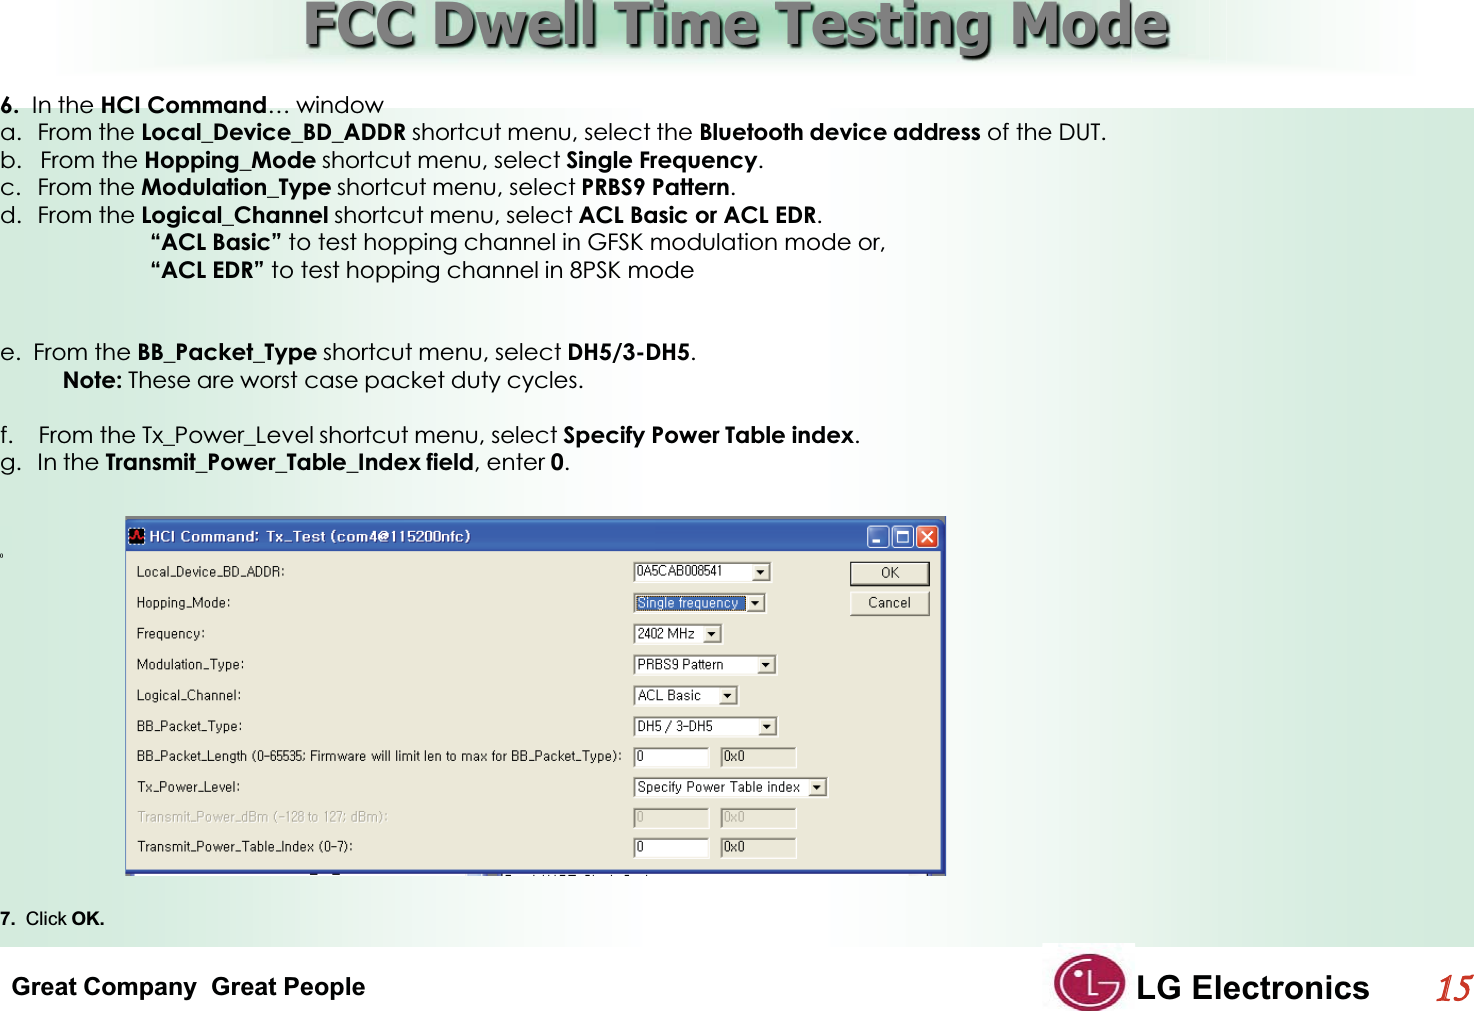 Great Company  Great People LG Electronics115  FCC Dwell Time Testing ModeG6.  In the HCI Command… windowa. From the Local_Device_BD_ADDR shortcut menu, select the Bluetooth device address of the DUT. b.   From the Hopping_Mode shortcut menu, select Single Frequency.c. From the Modulation_Type shortcut menu, select PRBS9 Pattern.d. From the Logical_Channel shortcut menu, select ACL Basic or ACL EDR.         “ACL Basic” to test hopping channel in GFSK modulation mode or,“ACL EDR” to test hopping channel in 8PSK mode           e.  From the BB_Packet_Type shortcut menu, select DH5/3-DH5.Note: These are worst case packet duty cycles.f.    From the Tx_Power_Level shortcut menu, select Specify Power Table index.g. In the Transmit_Power_Table_Index field, enter 0.GGG()GG7.  Click OK.G